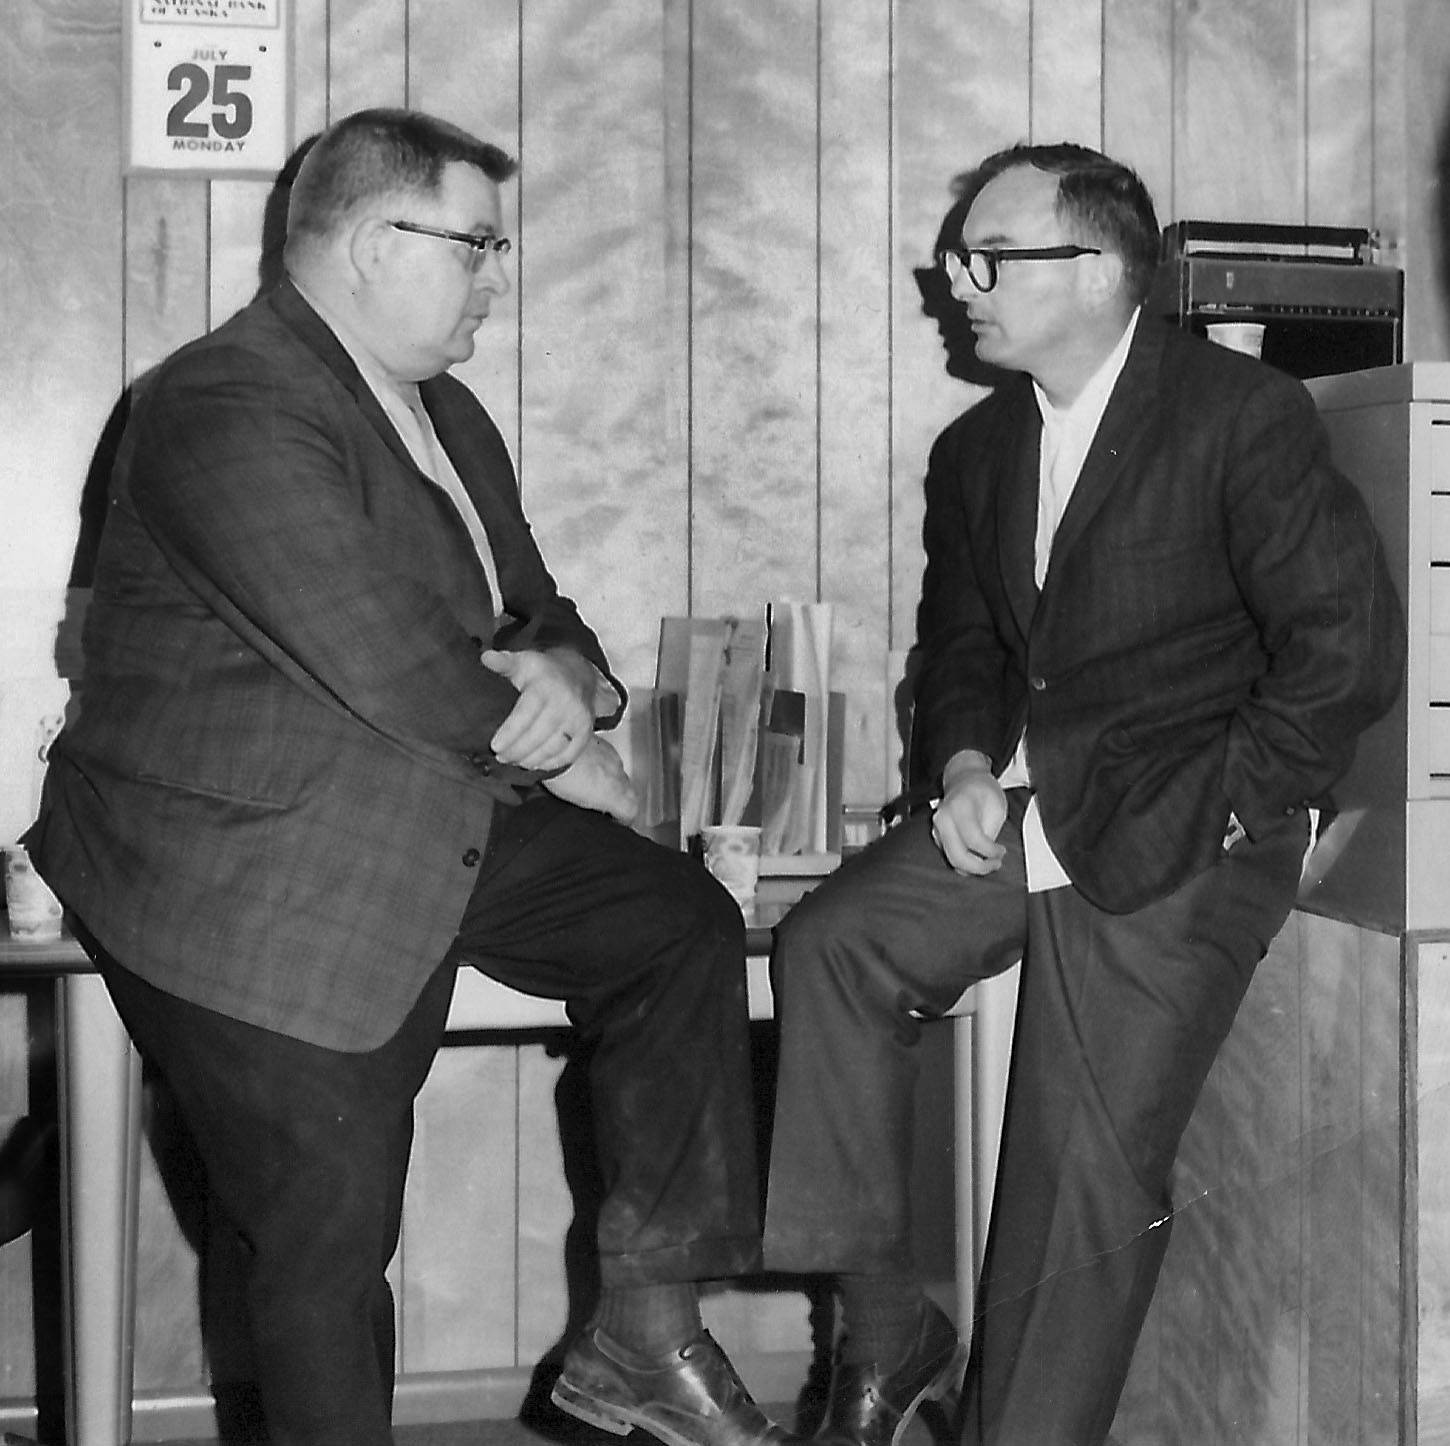 Dr. Robert Struthers, Kenai’s third resident physician, and Kenai dentist Dr. Charles Bailie converse in Struthers’ office in Kenai in July 1966. (Photo courtesy of Gloria Wisecarver)